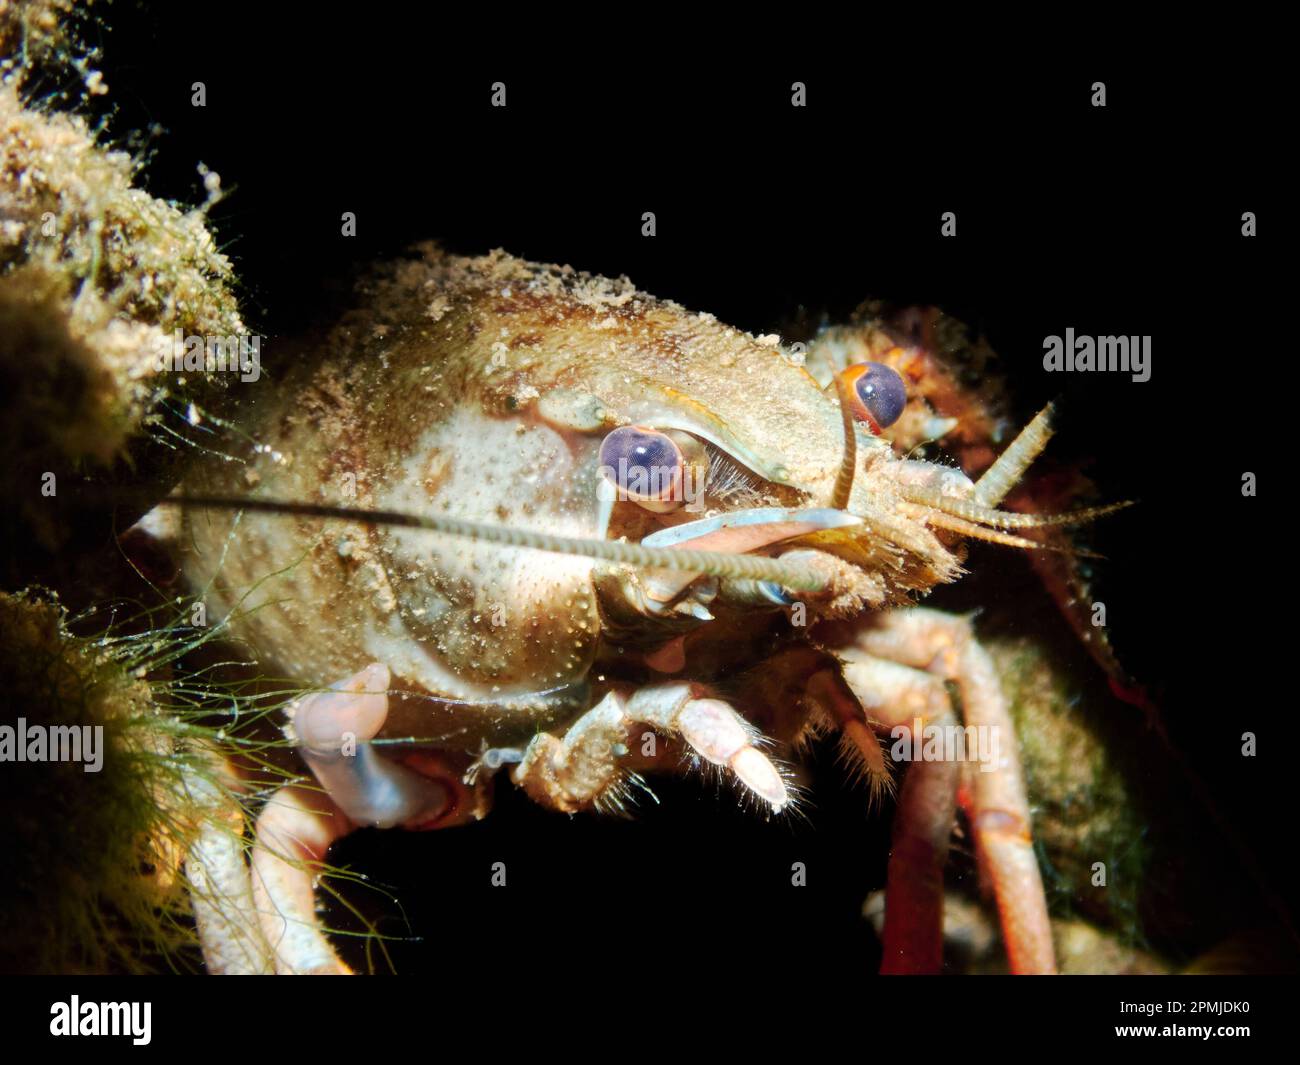 Underwater close up of a European Crayfish (Astacus Astacus) with black background in a freshwater lake. Stock Photo